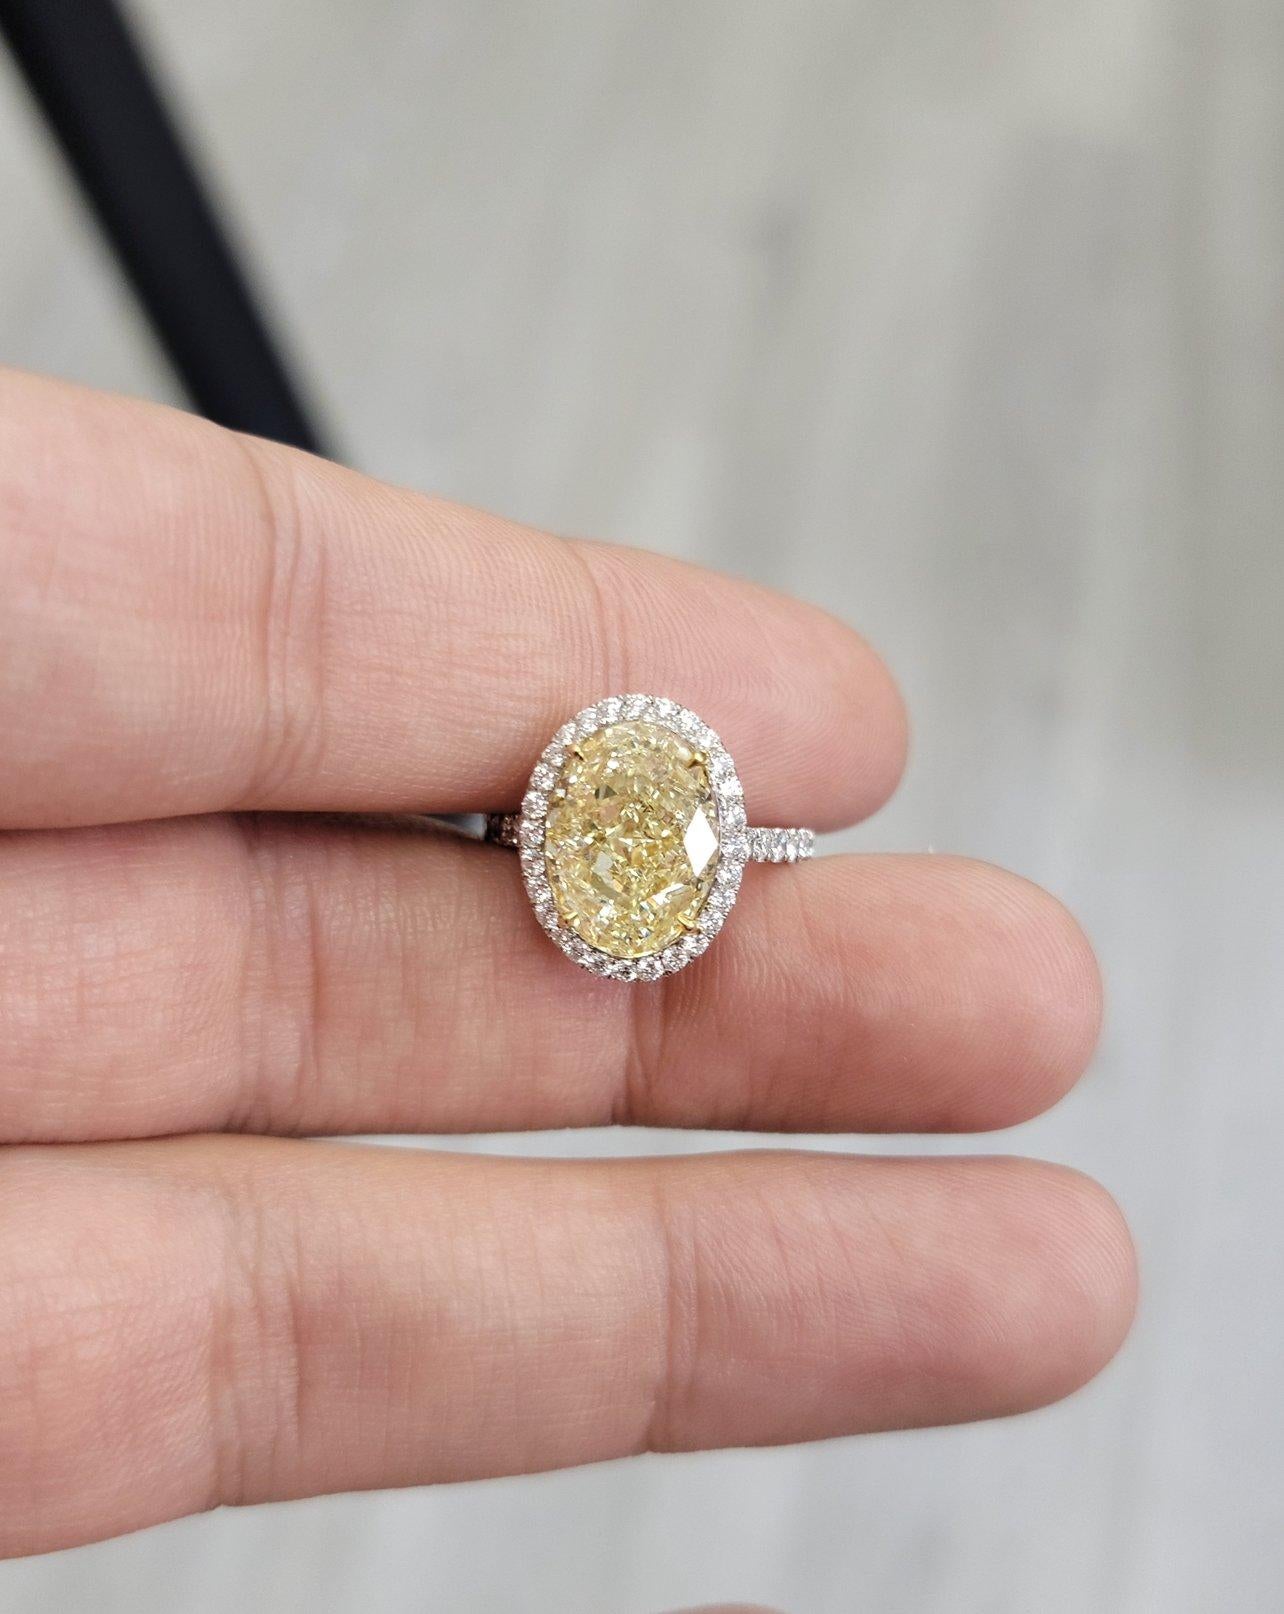 Stunning 6.02 carat Natural LIght Yellow Oval Diamond in Platinum and 18kt yellow gold. 
Approximately half a carat of white round diamonds surround the gorgeous center oval.
Beautifully even Color Distribution and sure to be loved for generations.